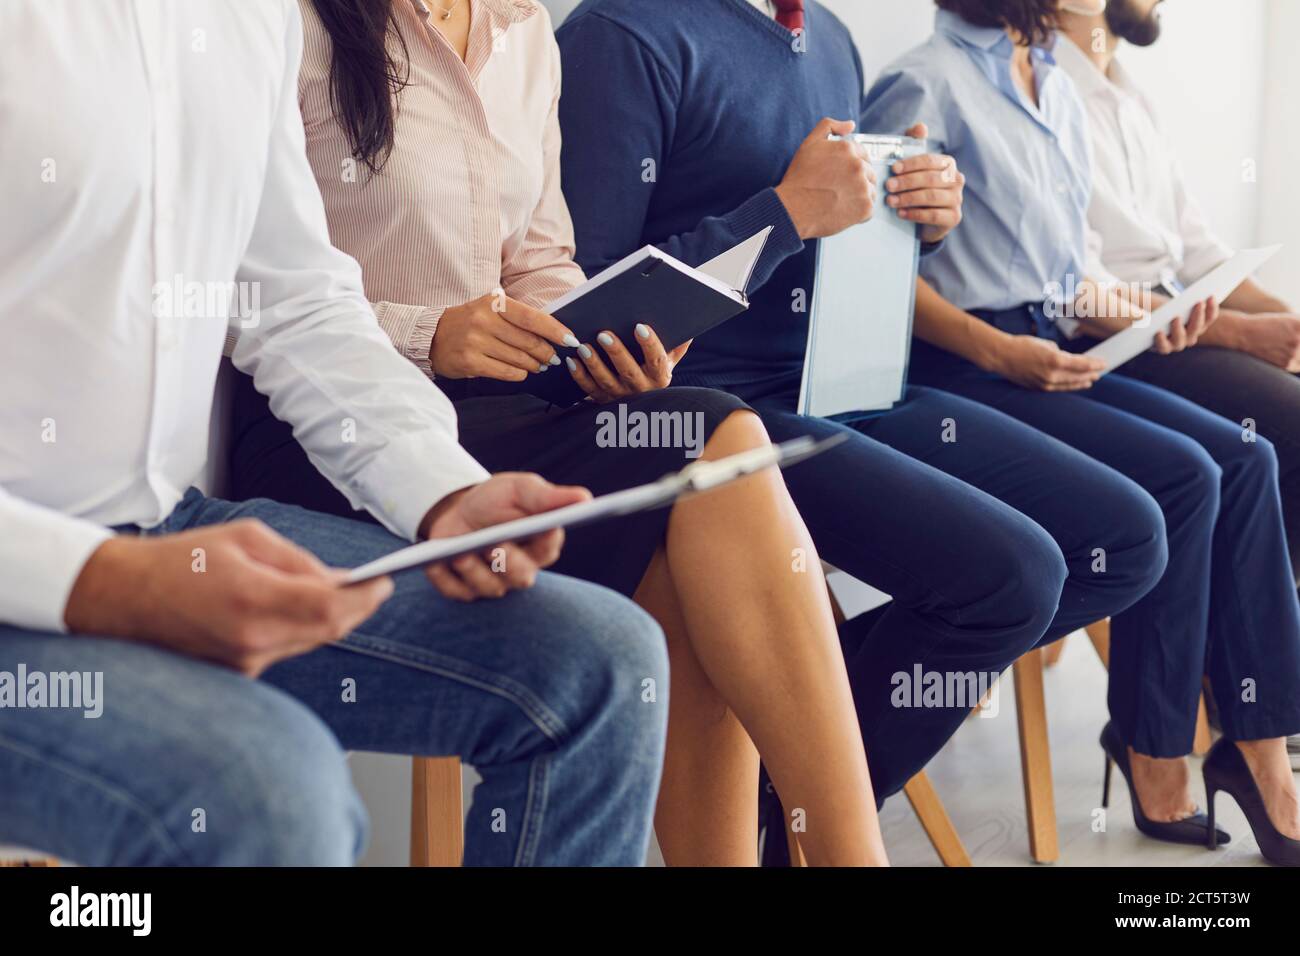 Cropped image of people sitting on chairs in a queue and holding paper in their hands. Stock Photo